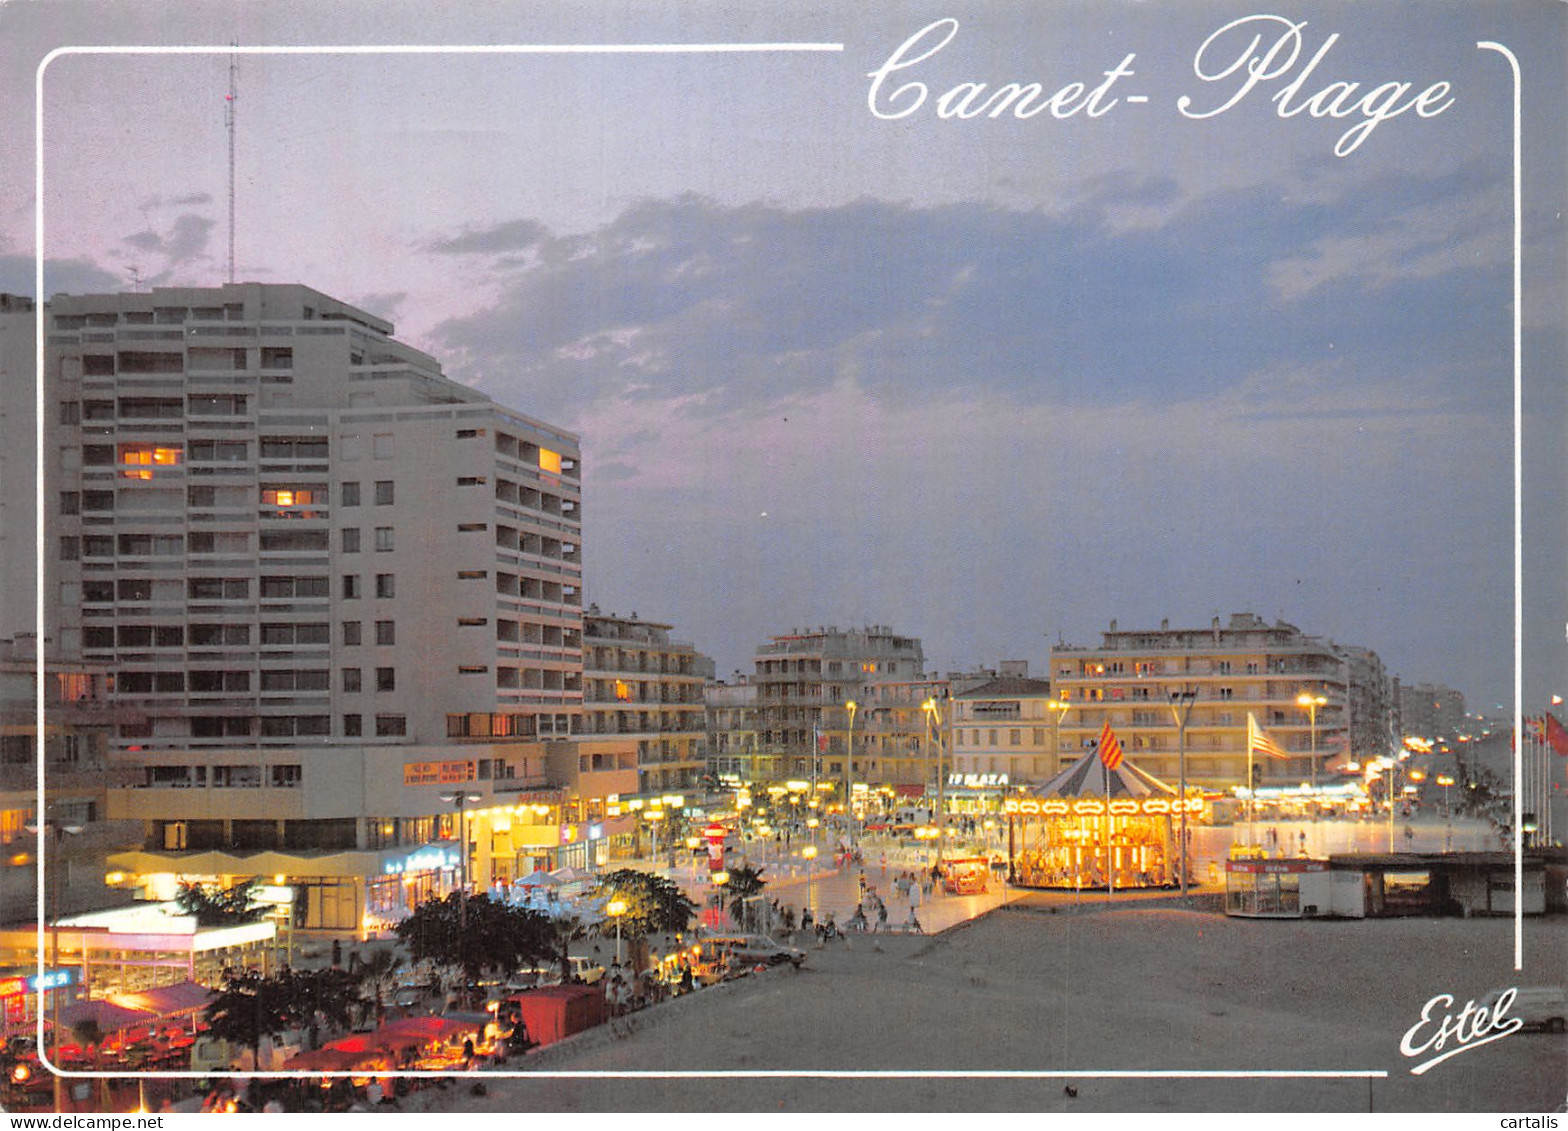 66-CANET PLAGE-N° 4449-A/0305 - Canet Plage